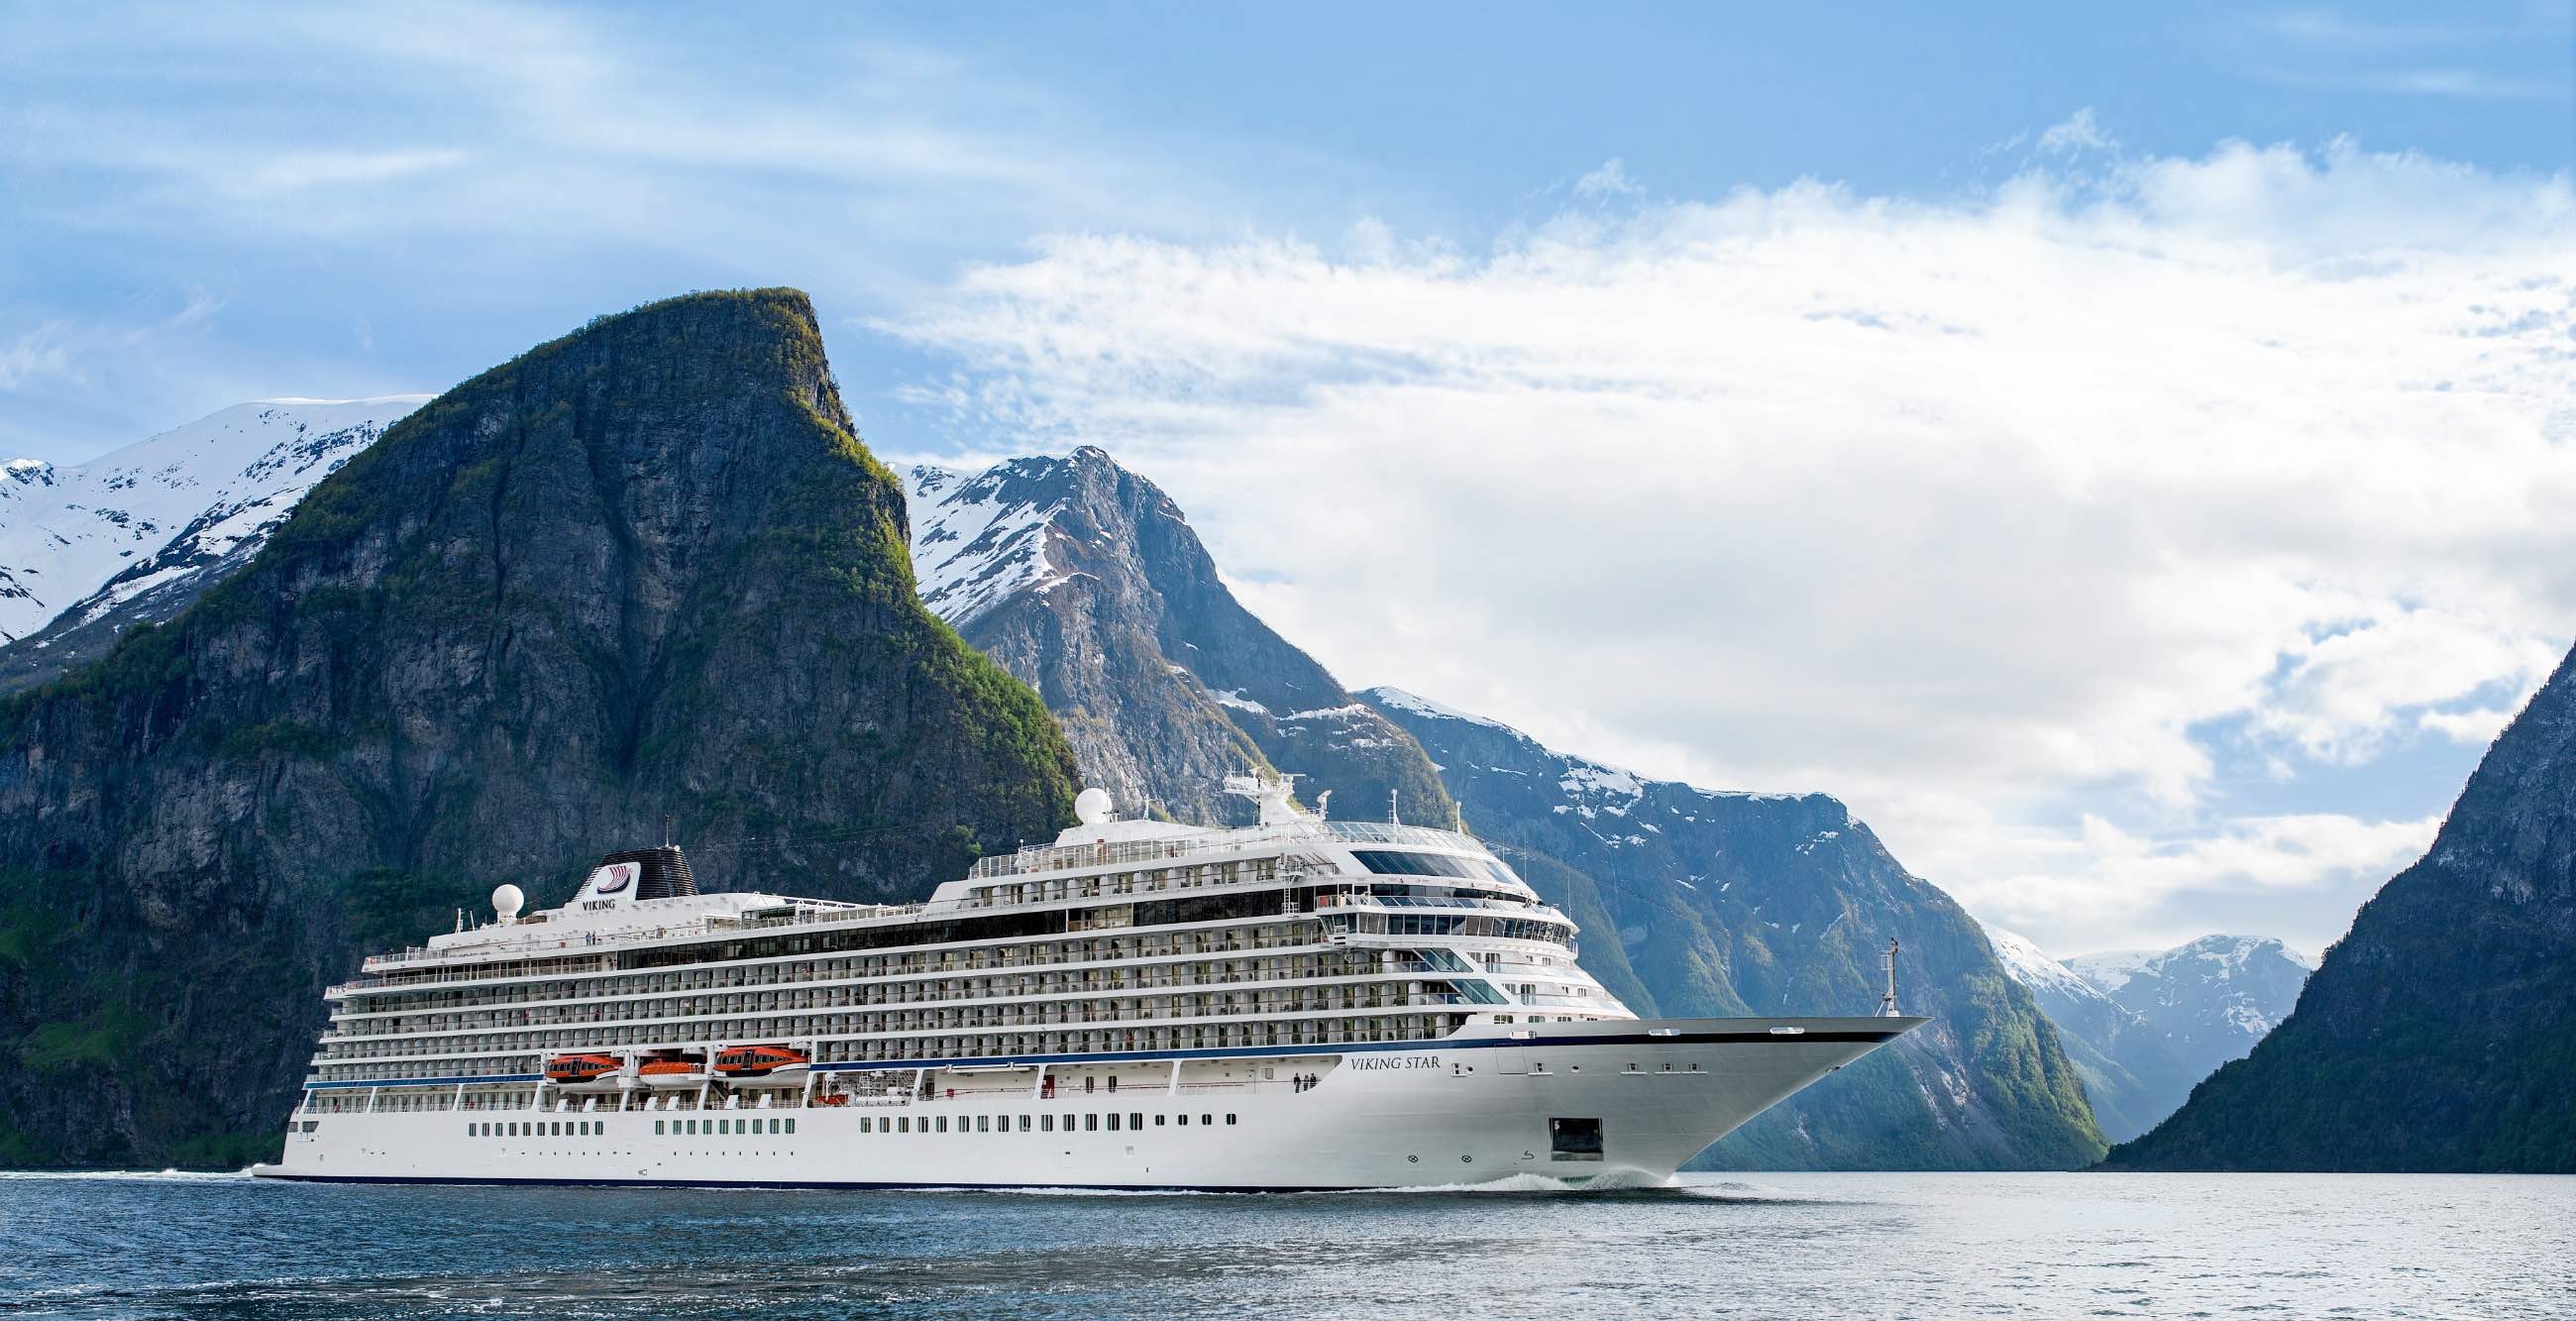 winter cruise offers